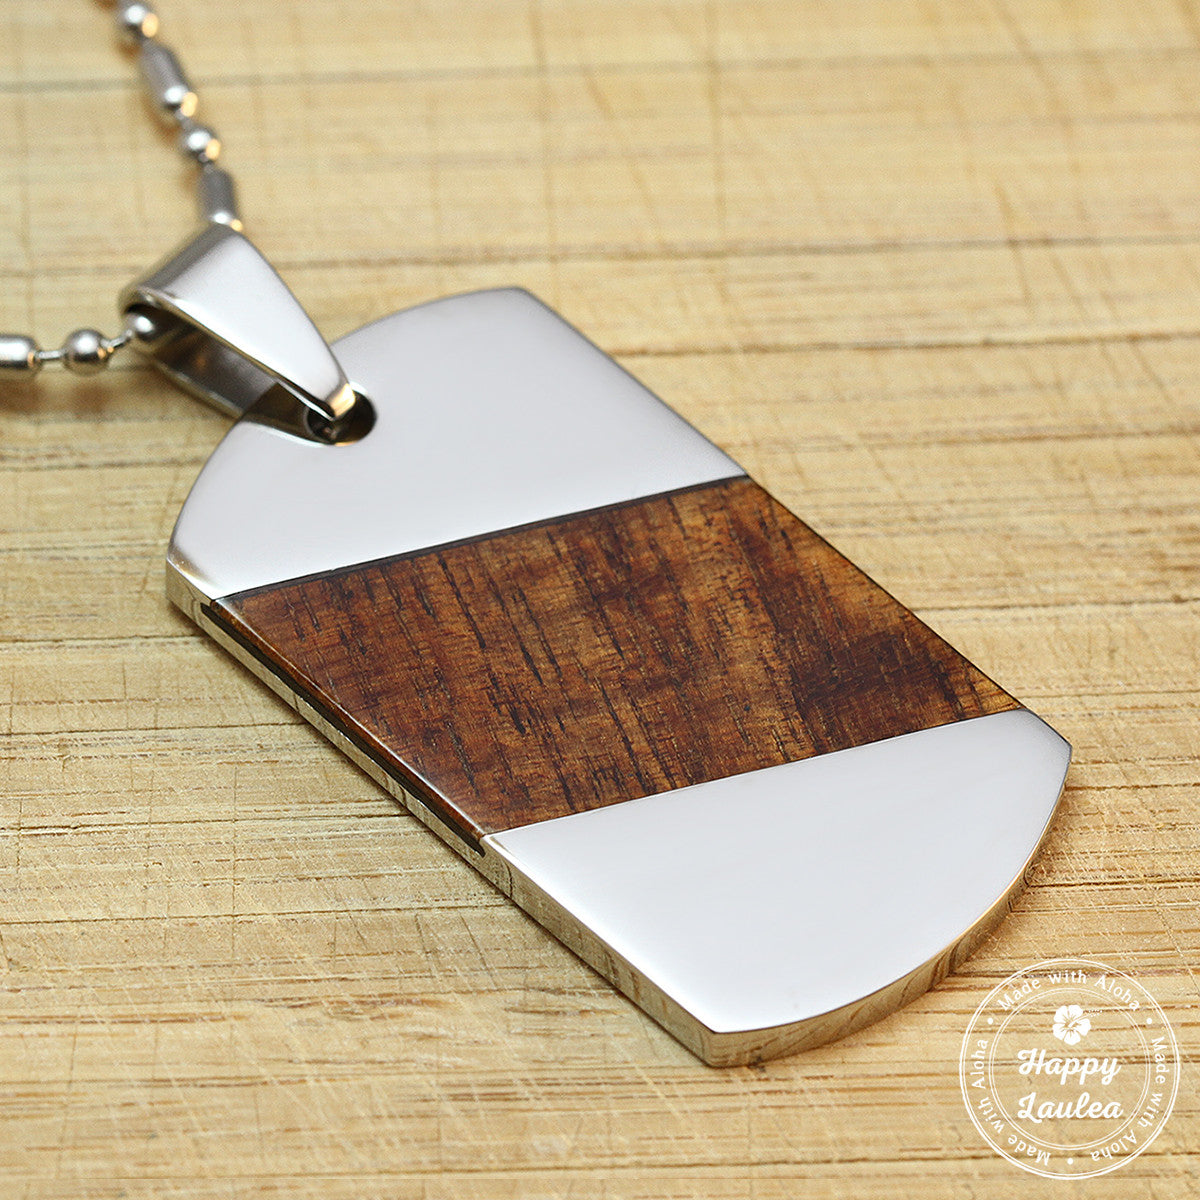 Stainless Steel Dog Tag Pendant with Slanted Koa Wood Inlay - 2.75"L x 1.37"W, Free Stainless Steel Chain